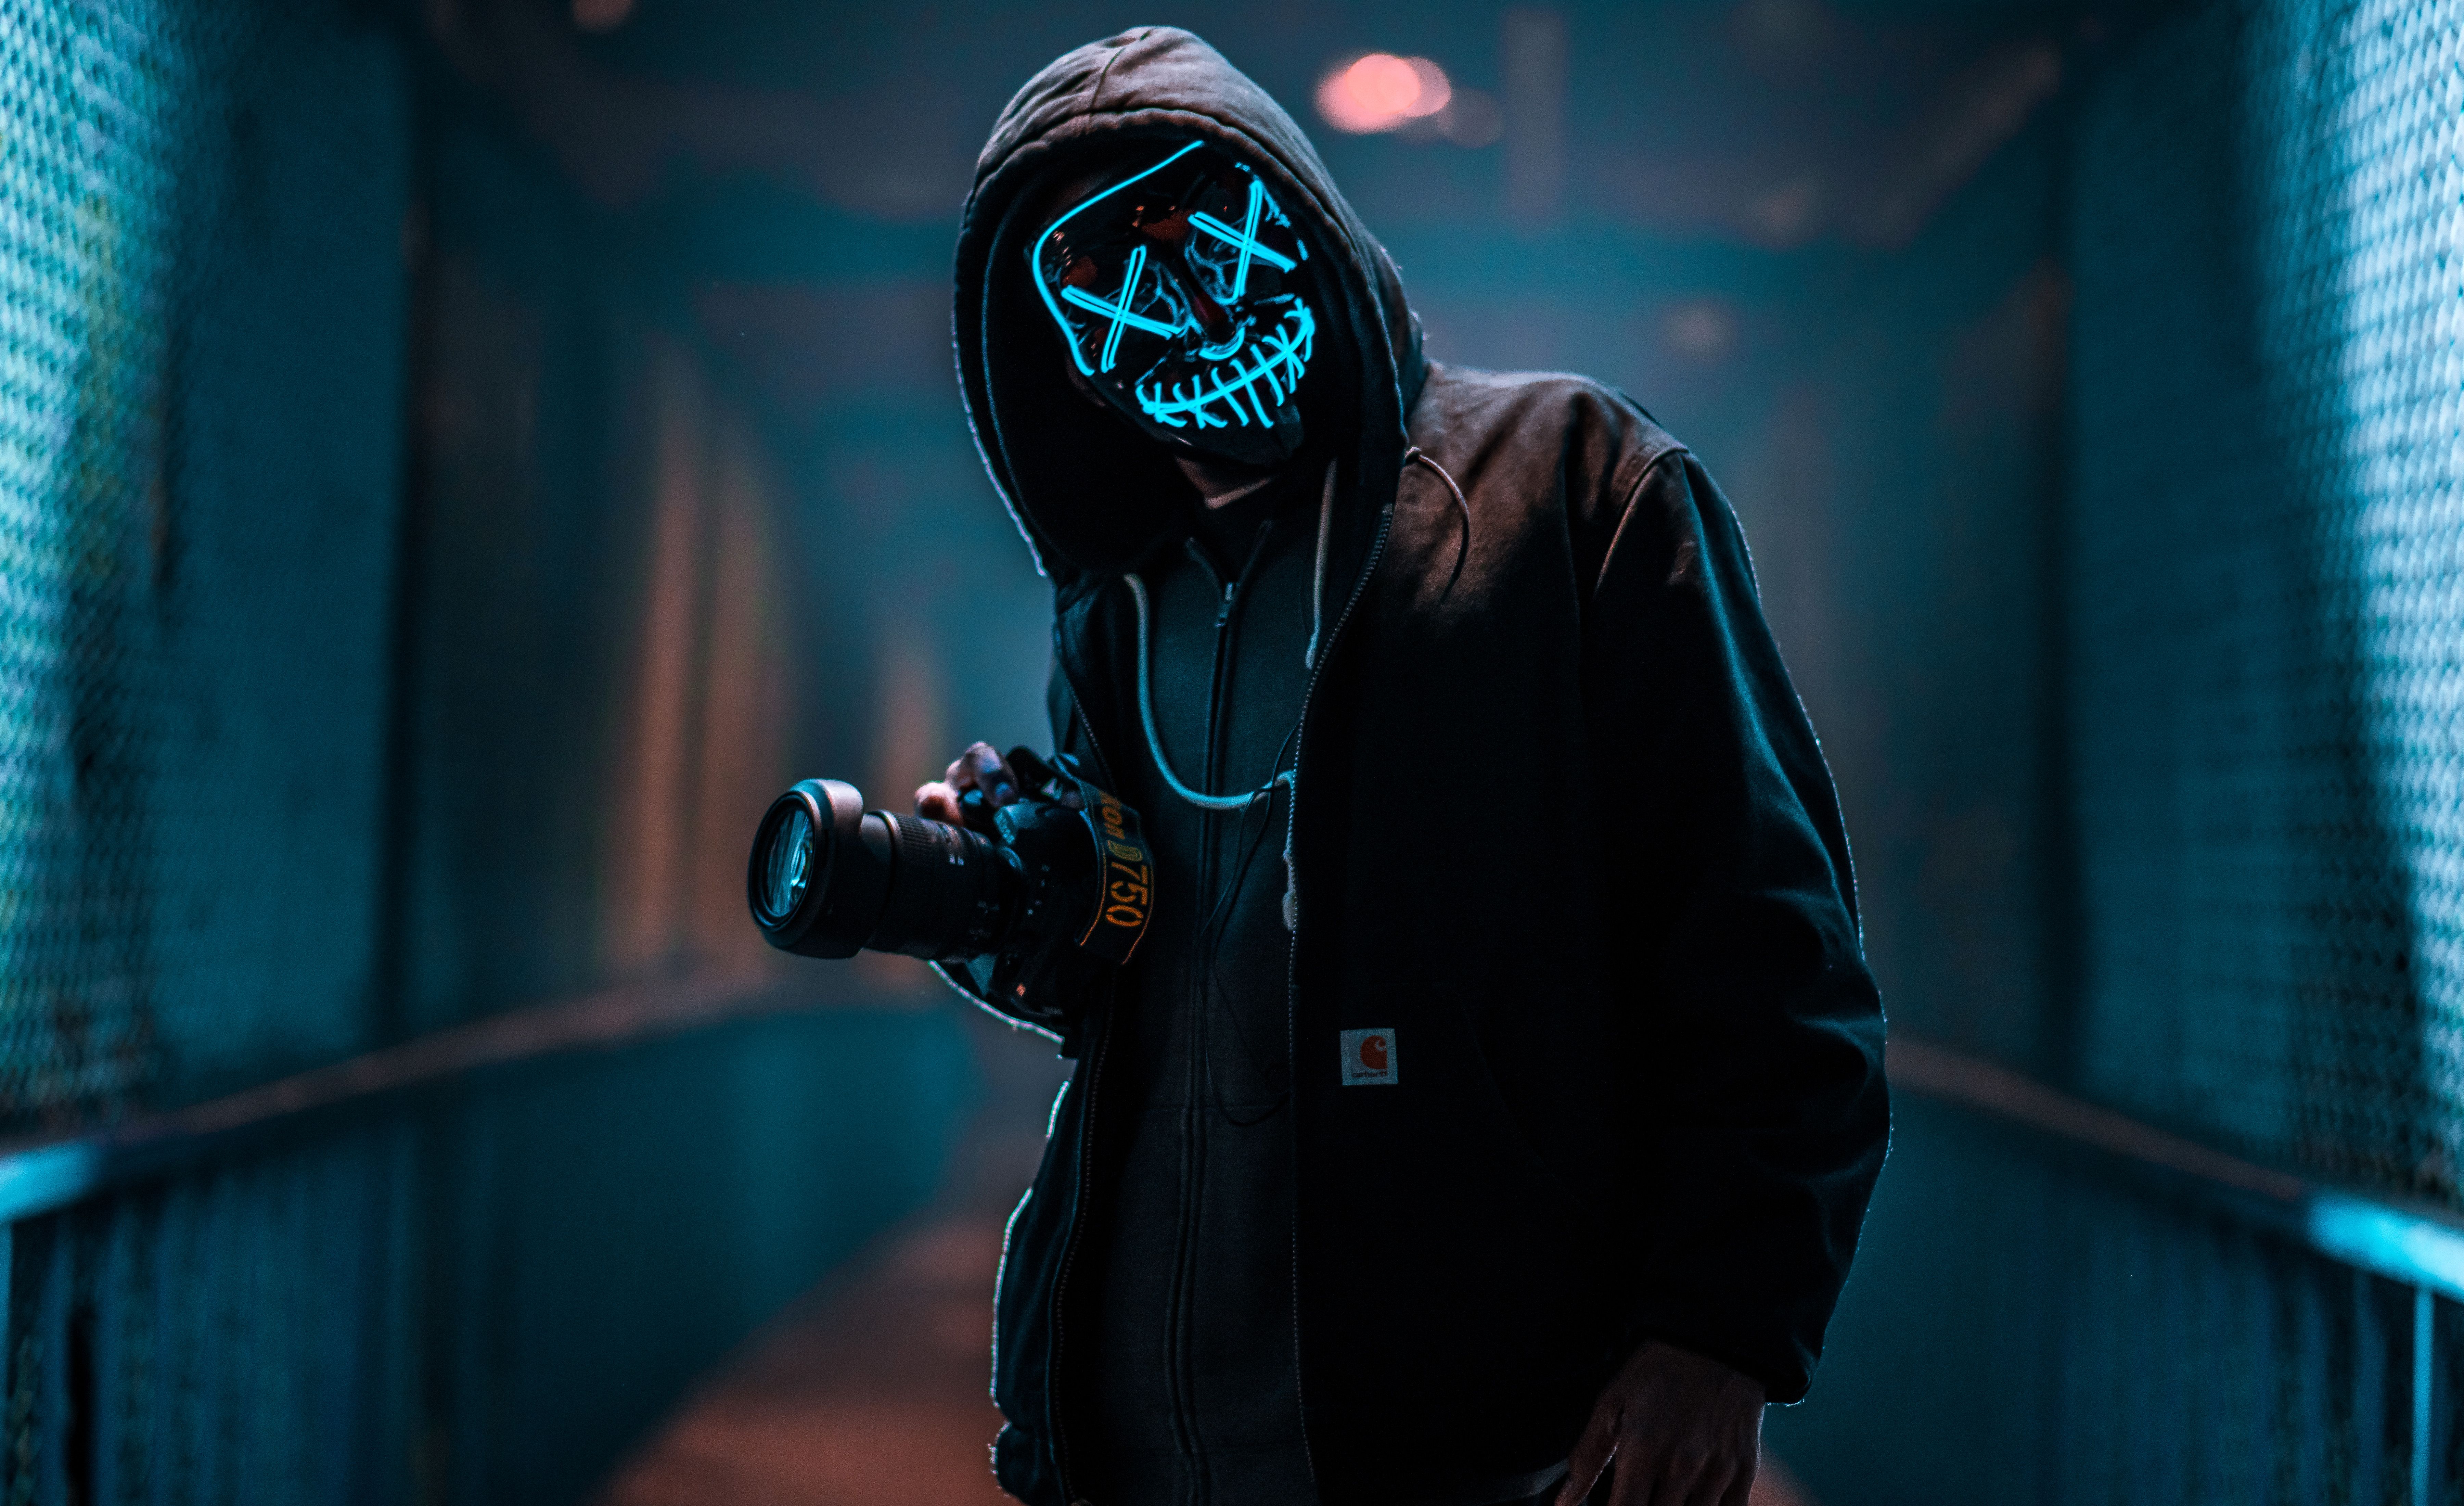 A guy in an anonymous neon mask with a camera Desktop wallpaper 1920x1200